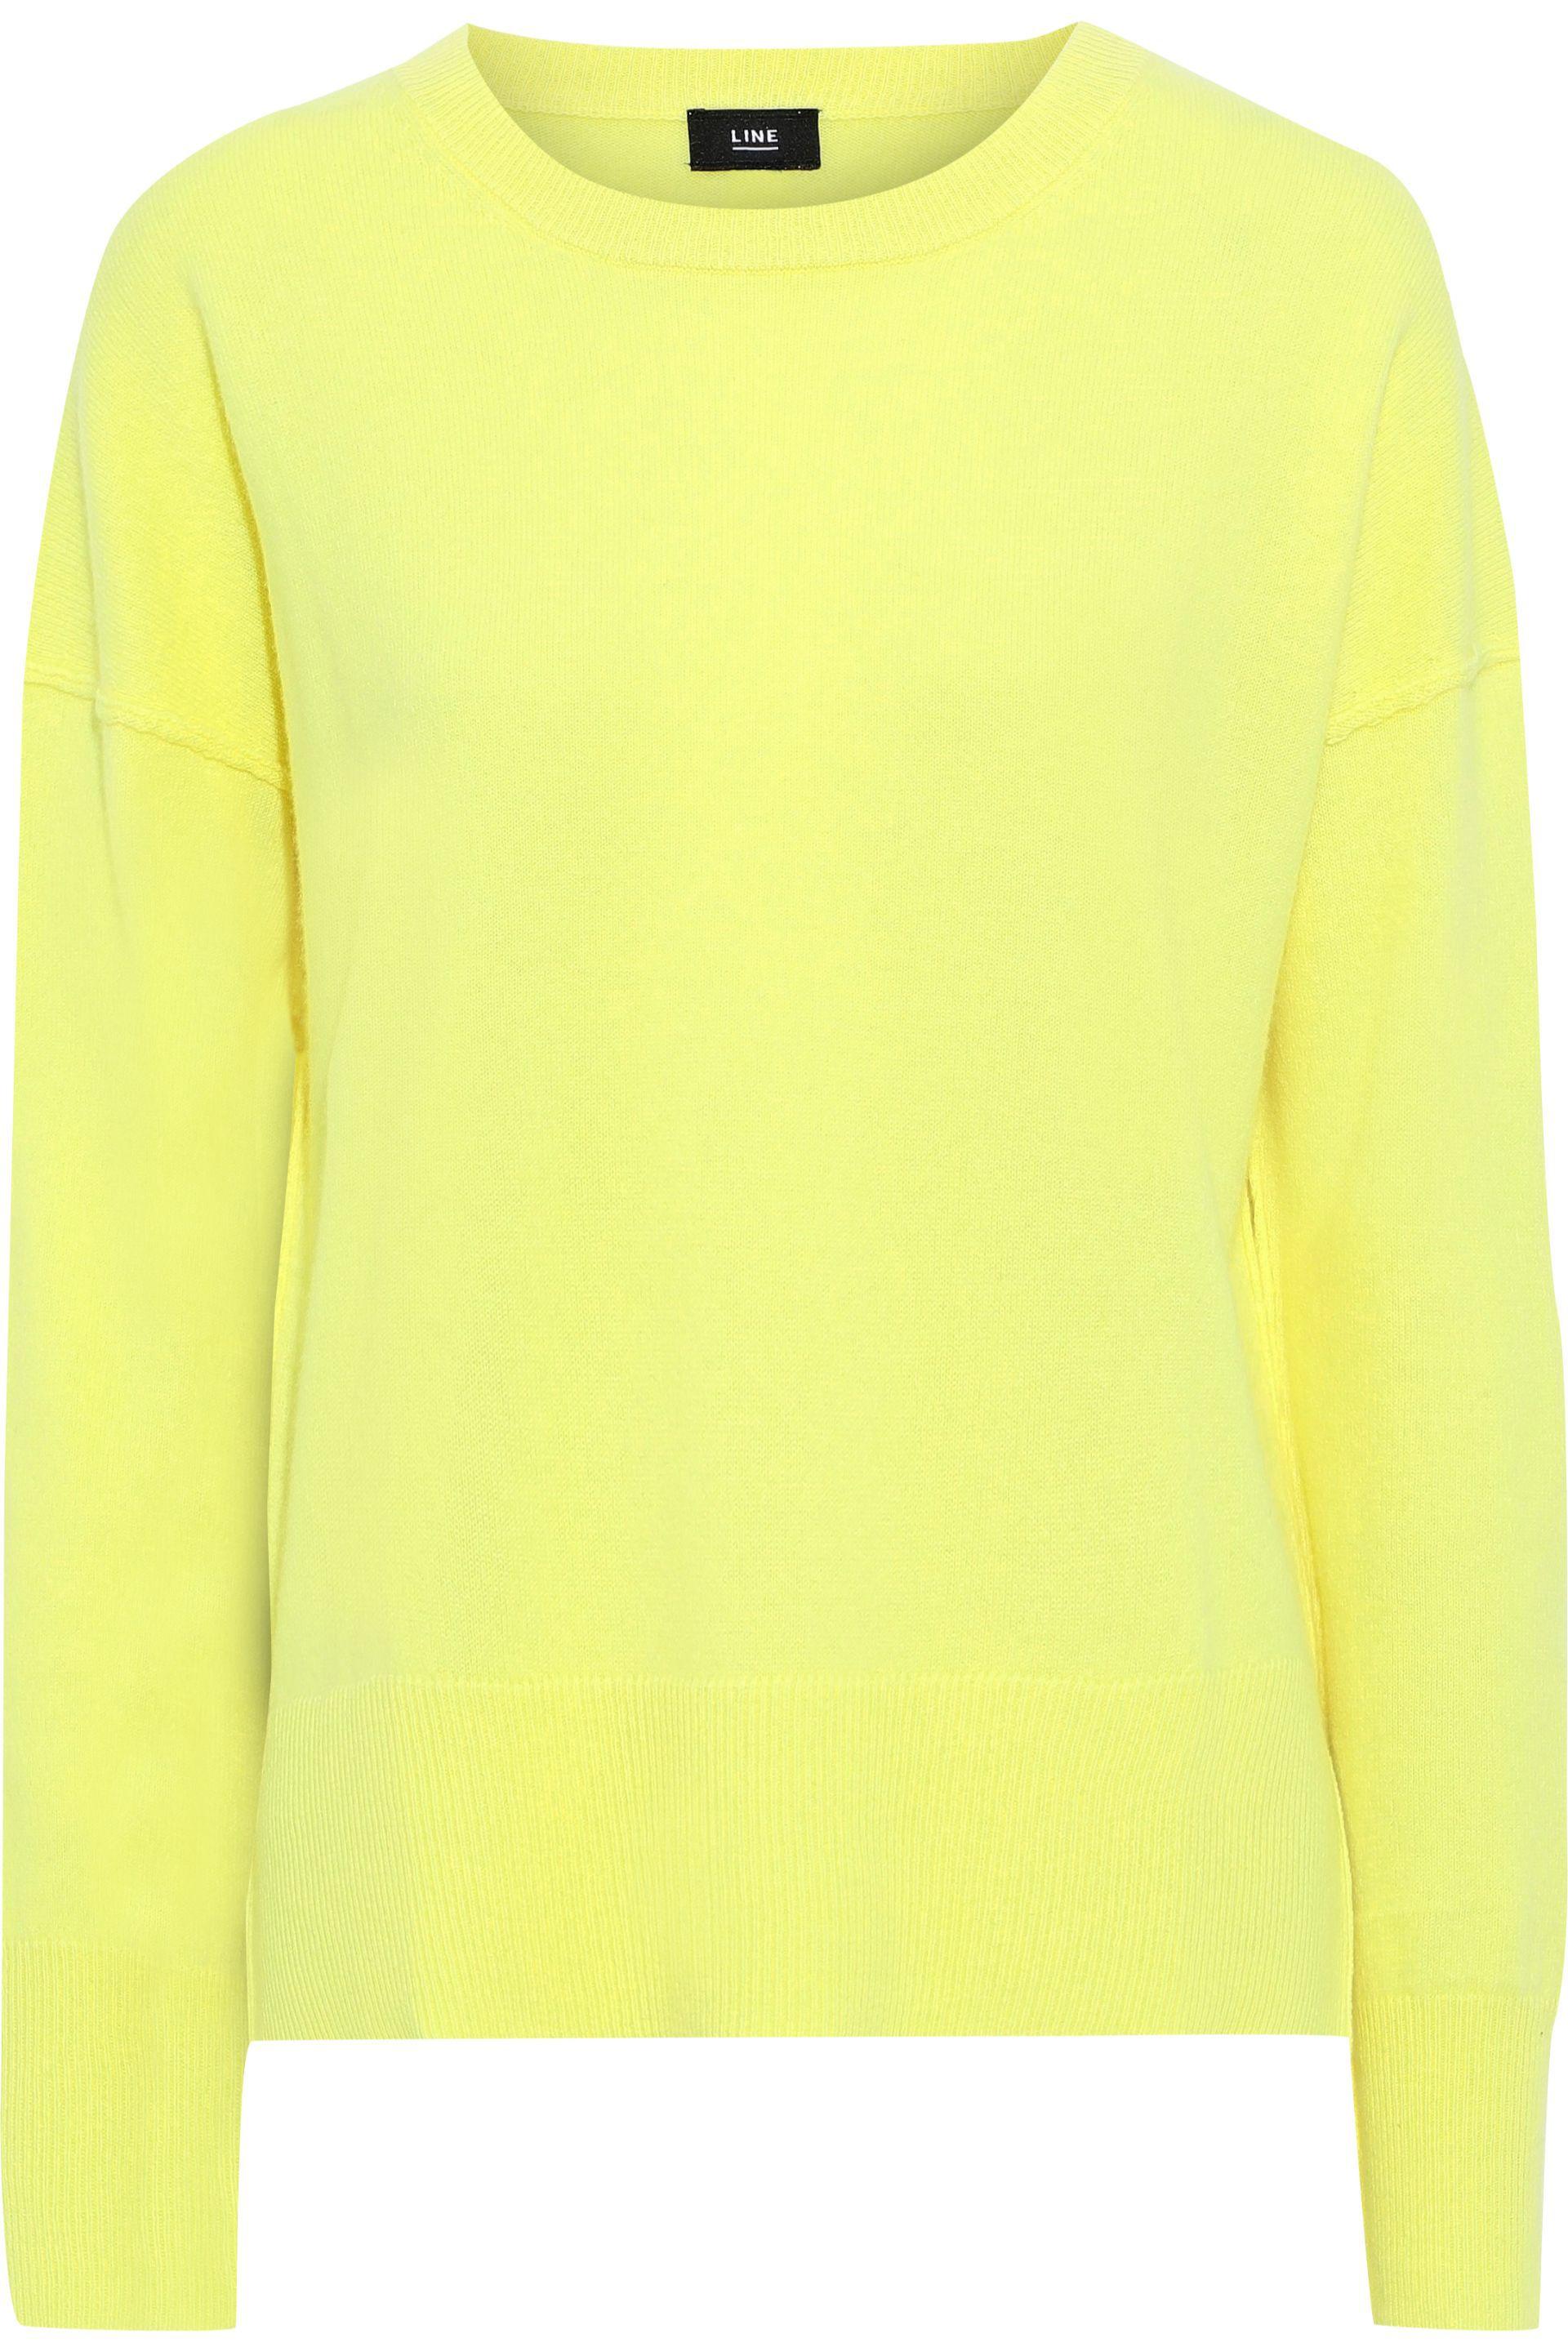 Line Neon Cashmere Sweater Yellow - Lyst